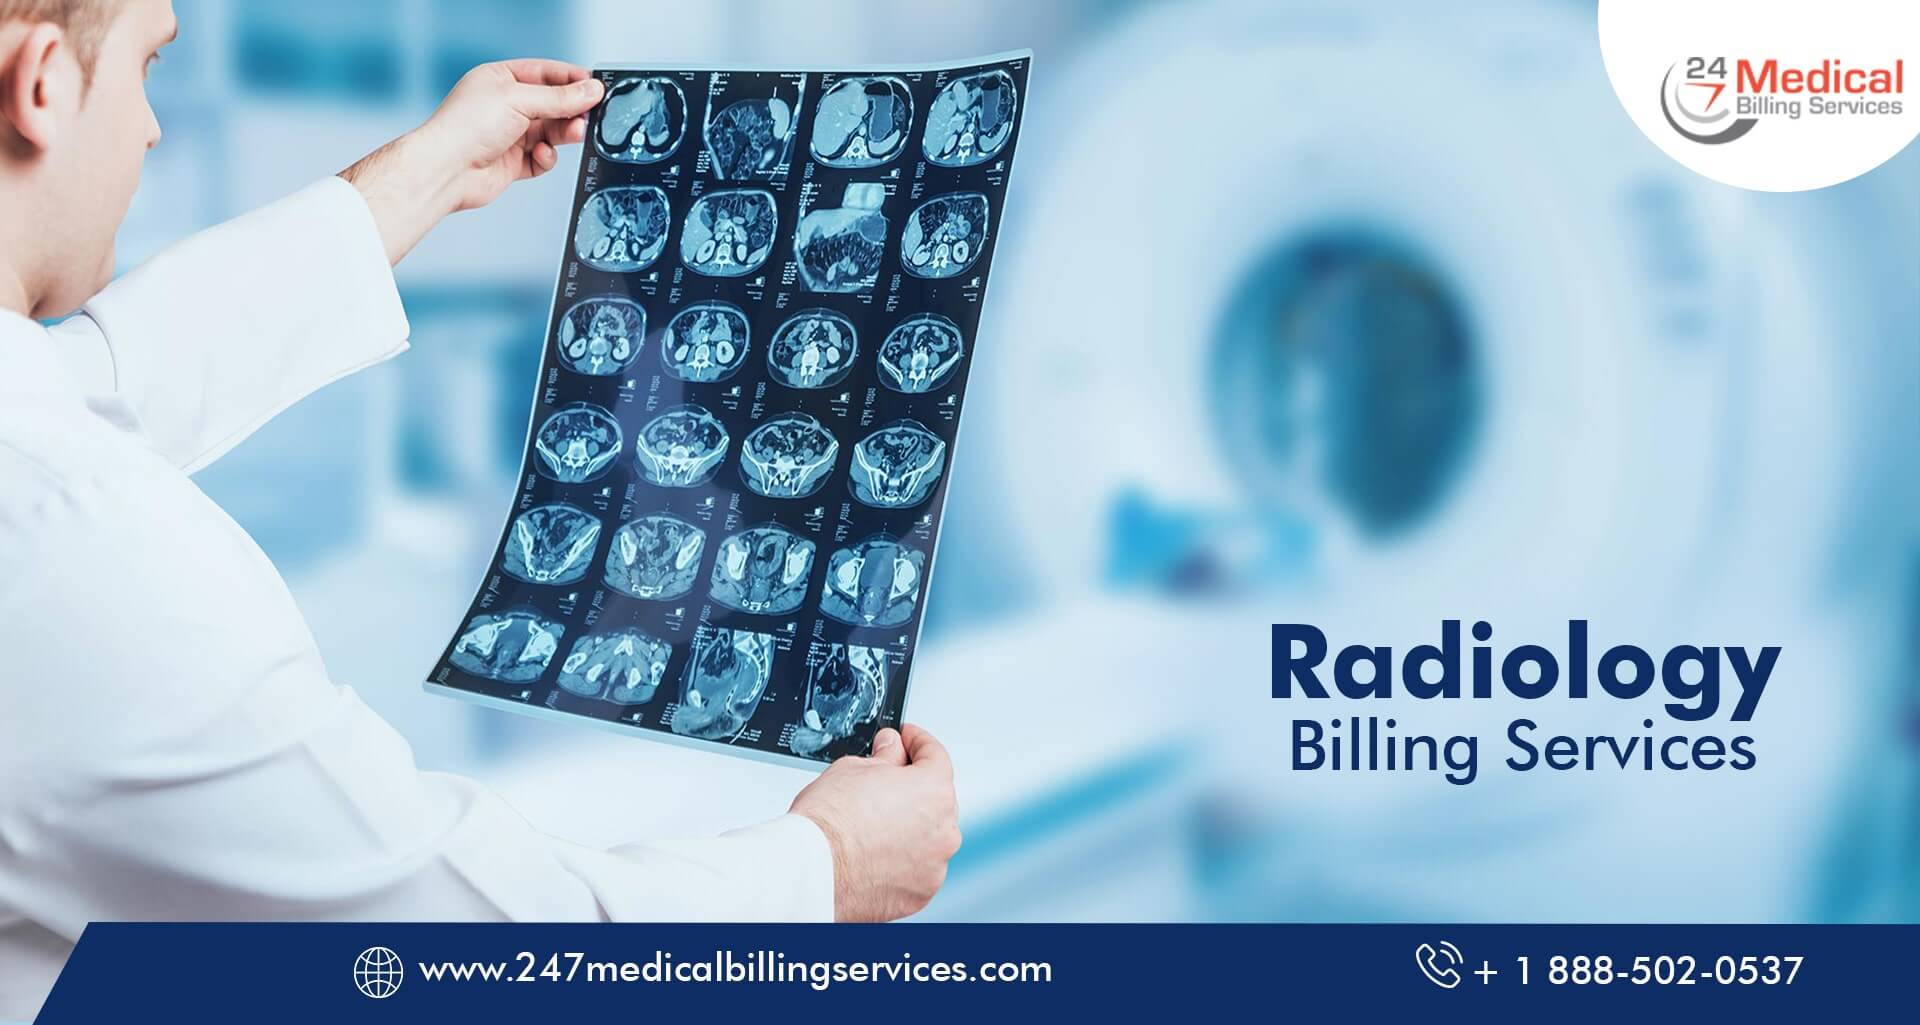  Radiology Billing Services in Billings, Montana (MT)